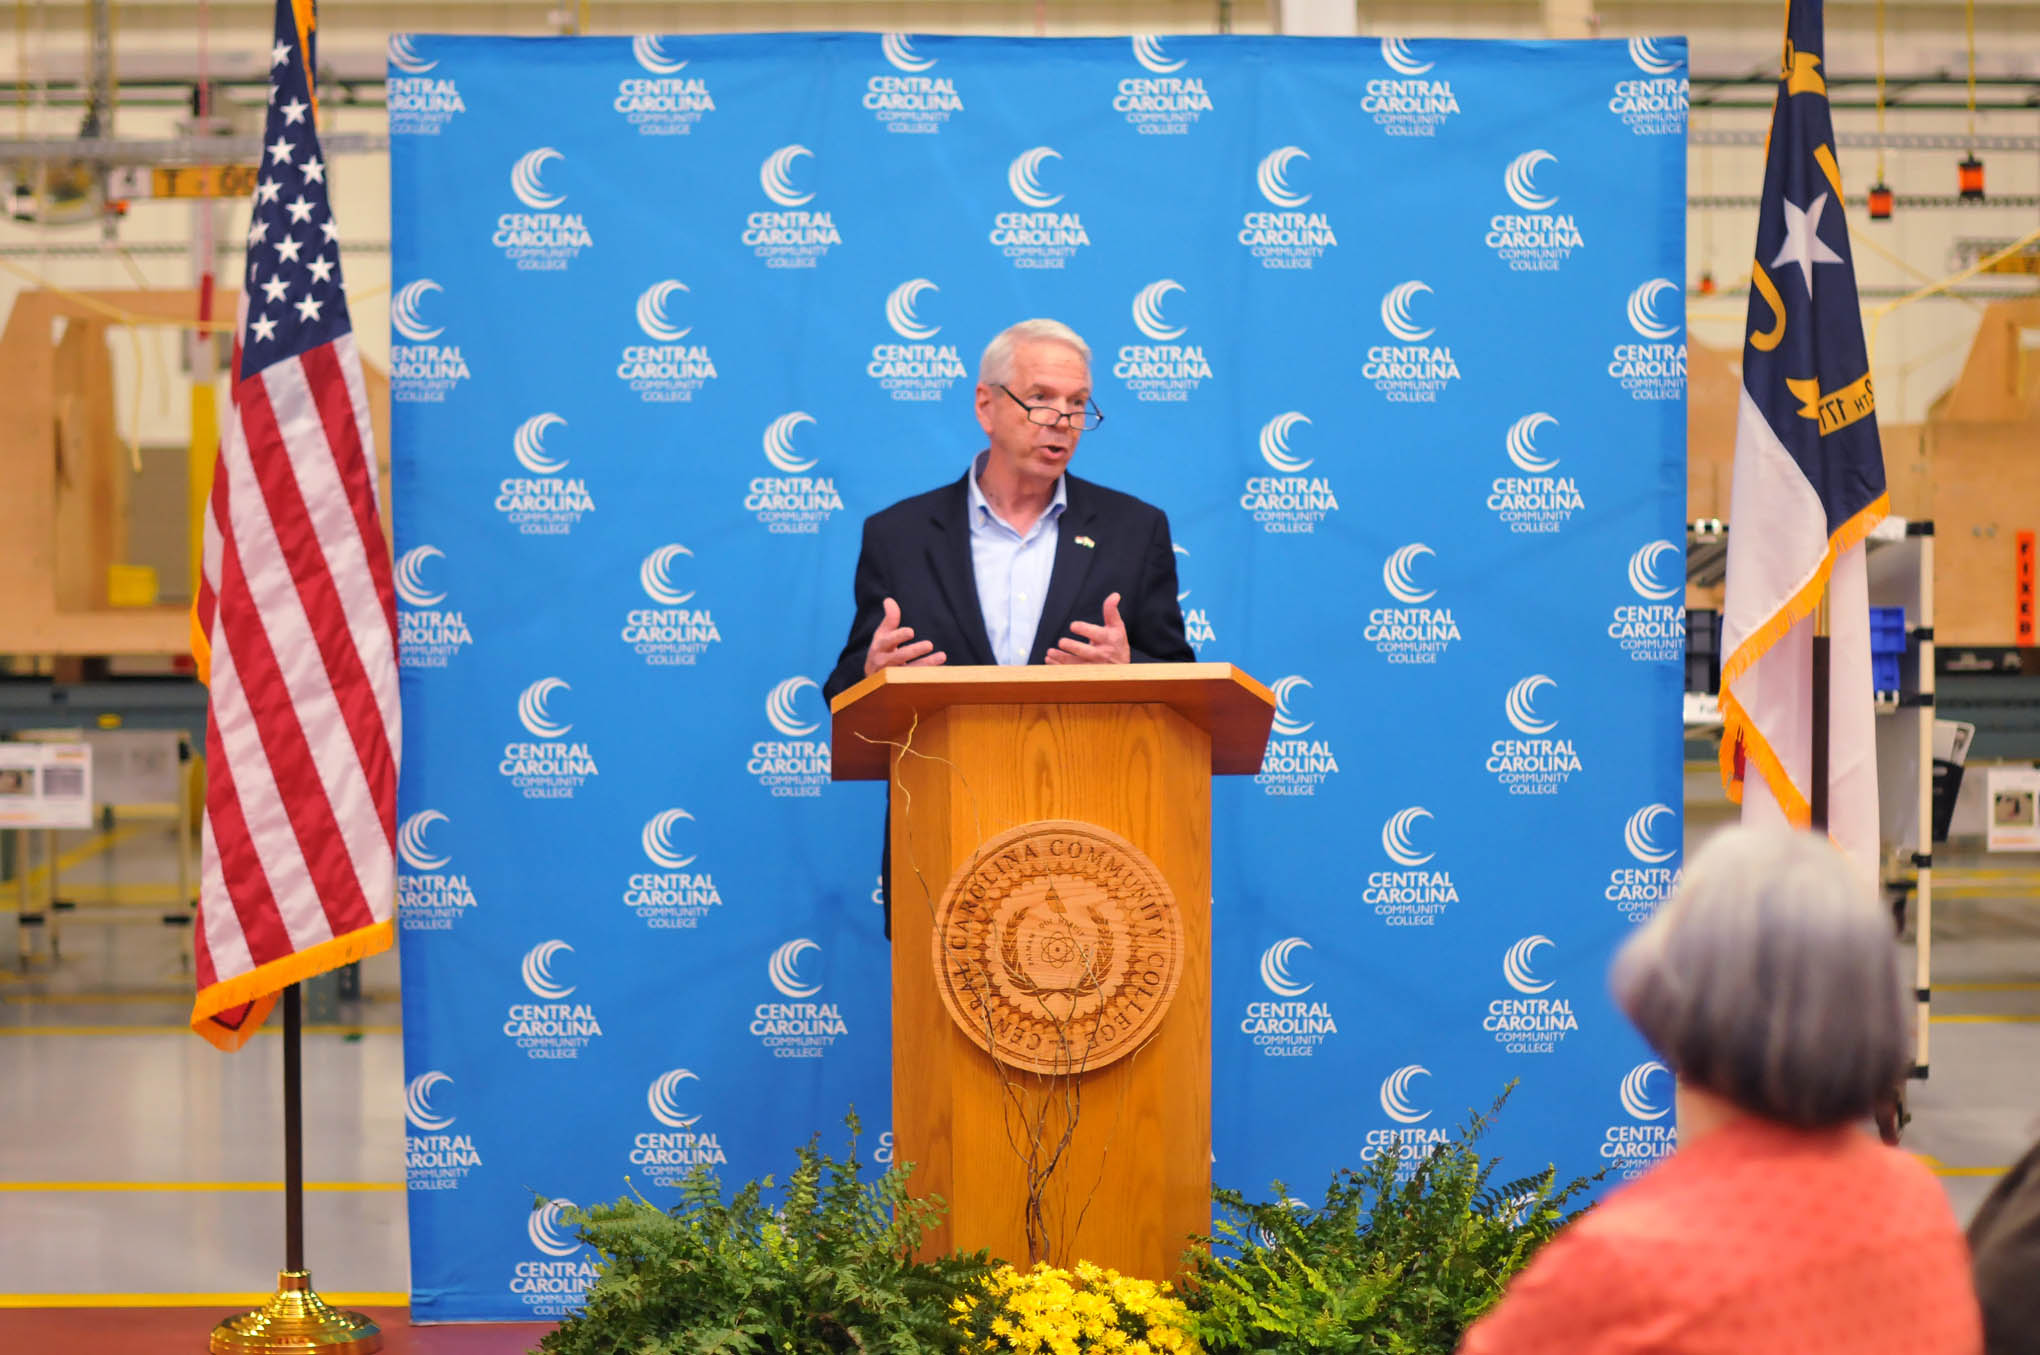 Click to enlarge,  Bob Joyce, Director of Development for the Sanford Area Growth Alliance, speaks at the Central Carolina Community College 10,000 hours of industrial training celebration event. 